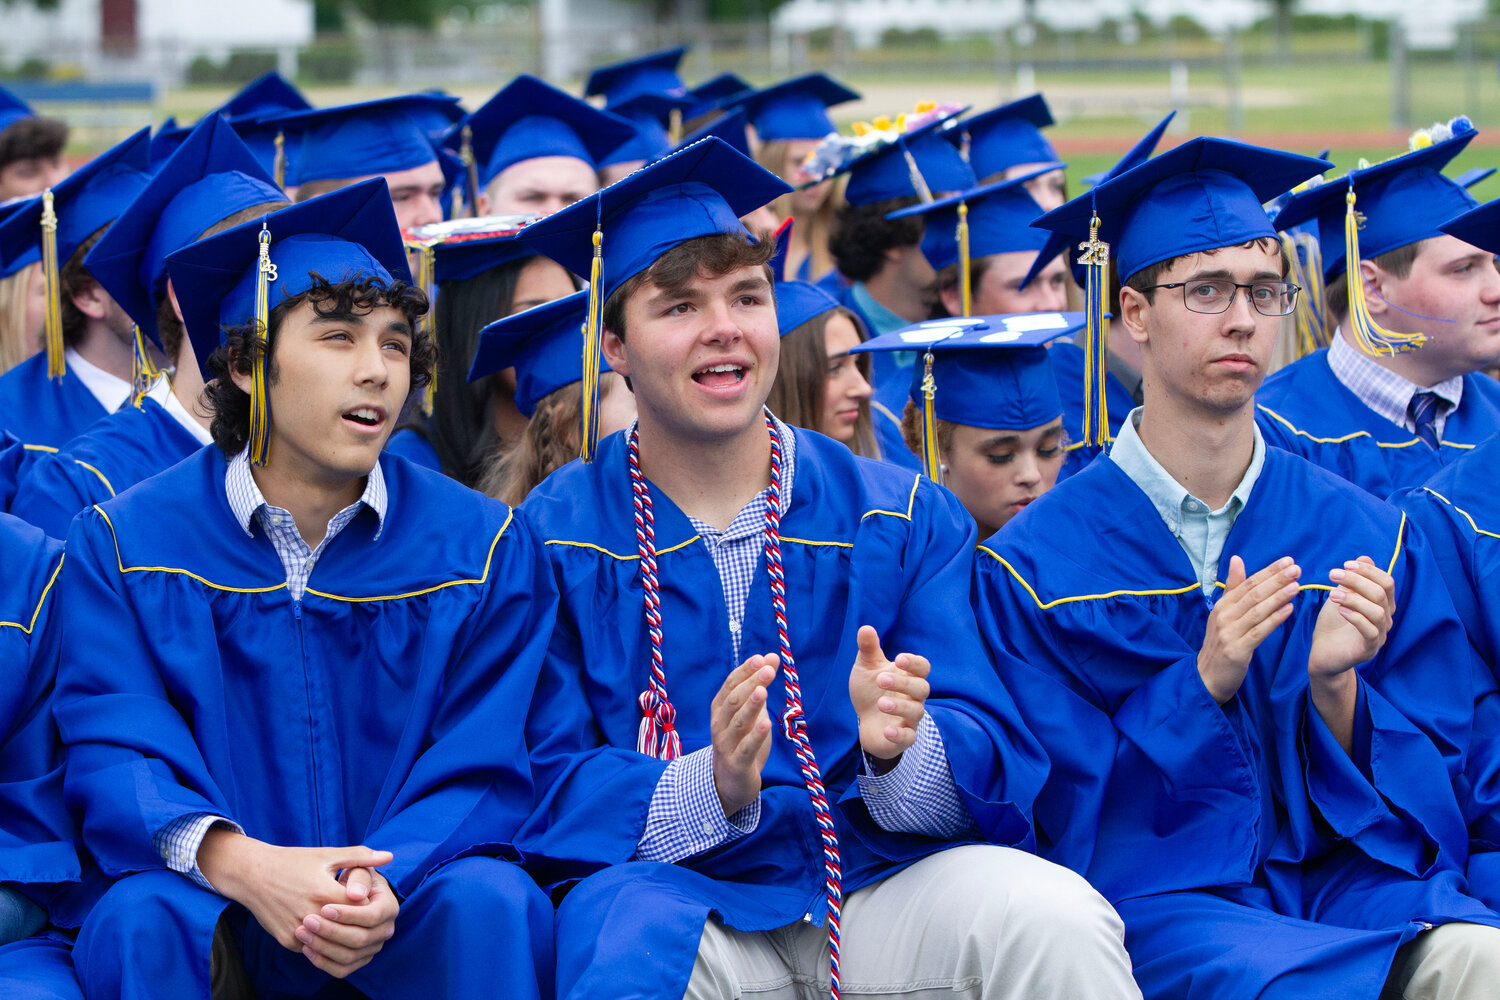 Gavin Lesk, Daniel Lemos and Christopher LeClair (from left to right) applaud a speaker during Sunday’s graduation ceremony at Barrington High School.